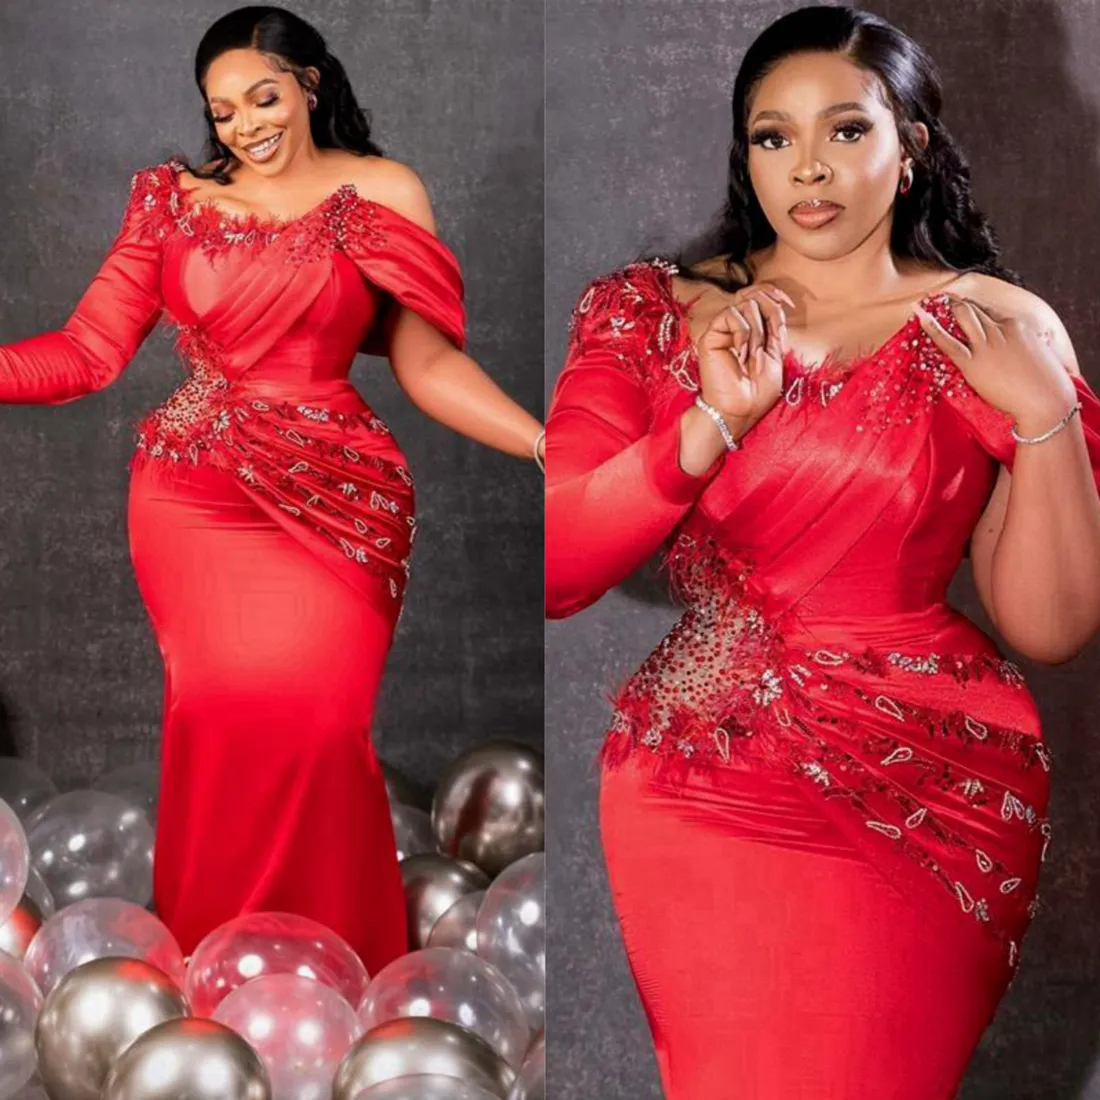 Plus Size Aso Ebi Prom Black Women Mermaid Illusion Promdress Formal Dress For Special Ocns Feathered Beaded Birthday Dresses Gala Gowns AM Dress Es